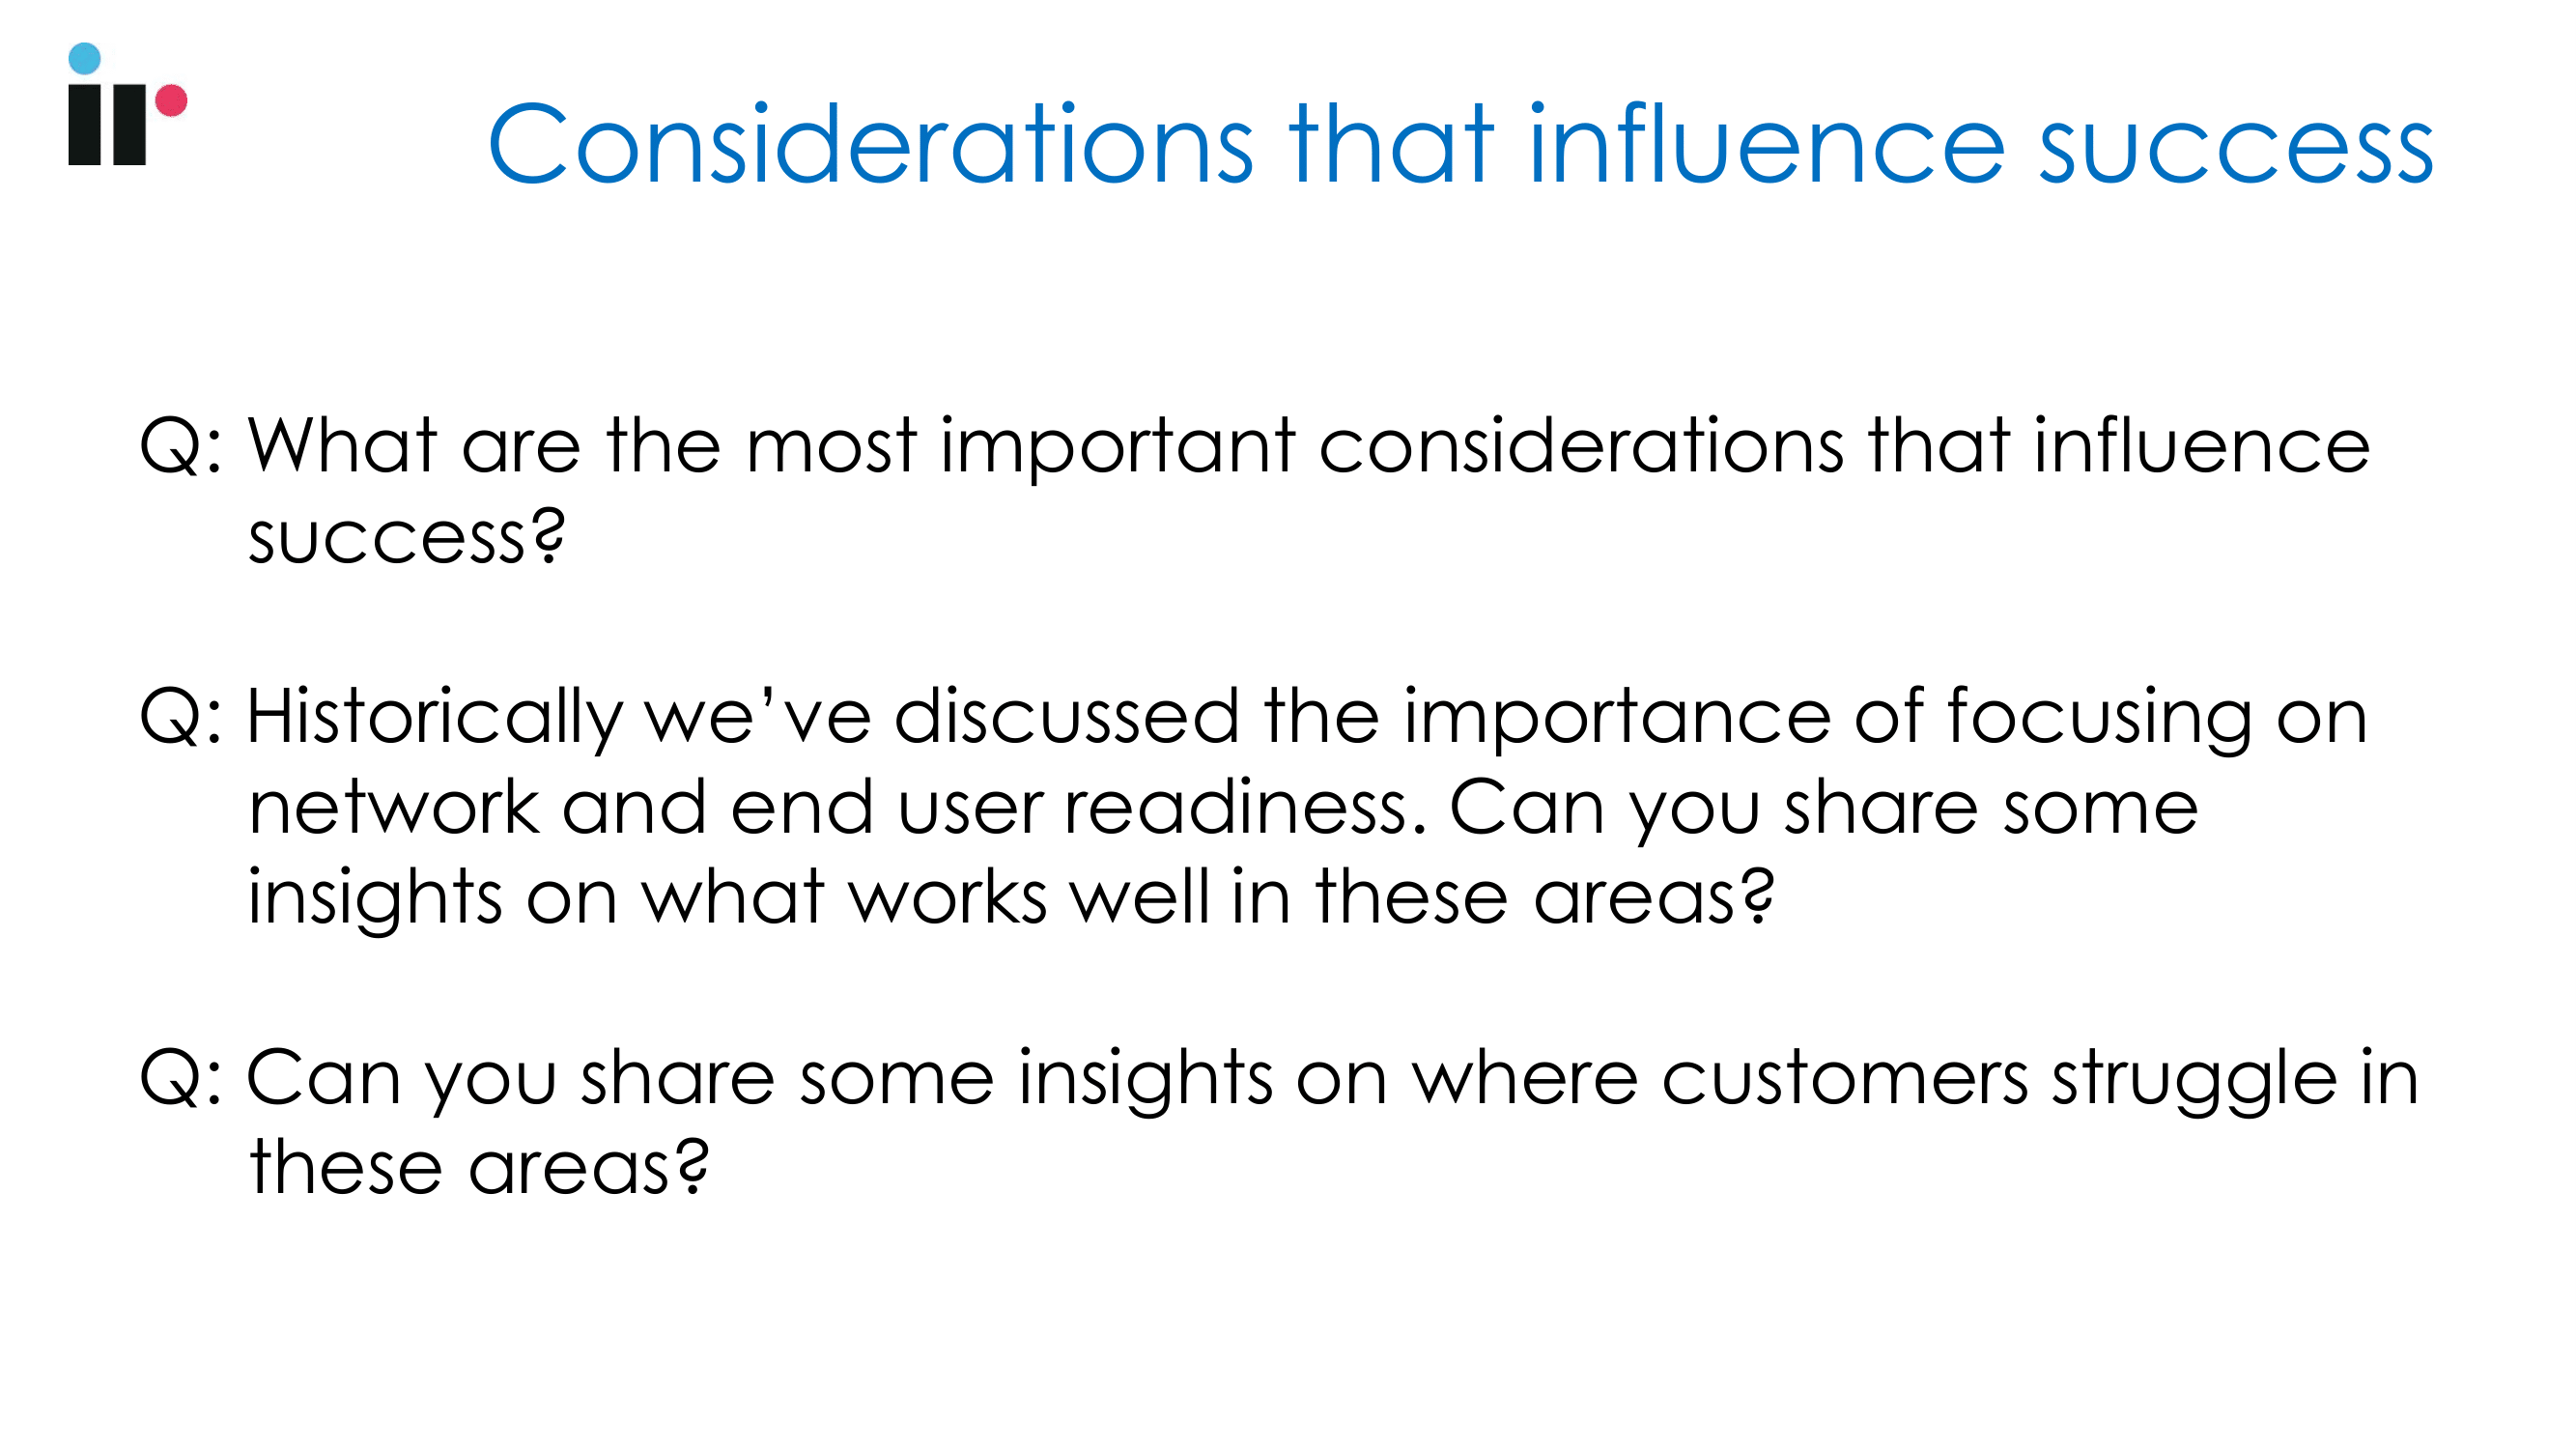 Questions about the influence of success